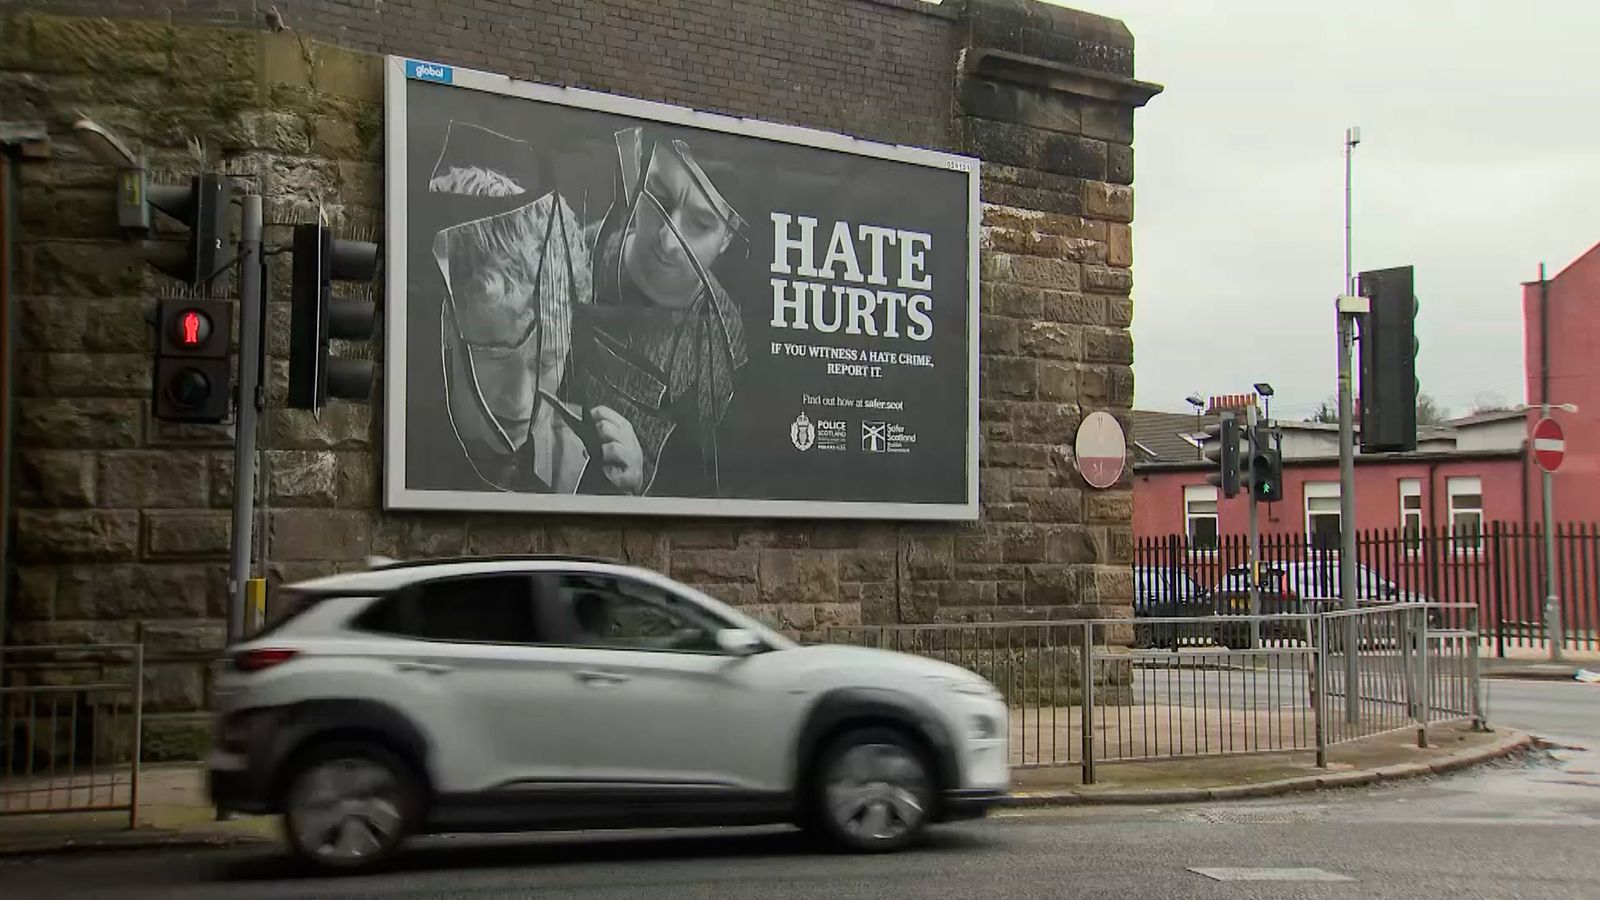 Scotland's controversial new hate crime laws come into force